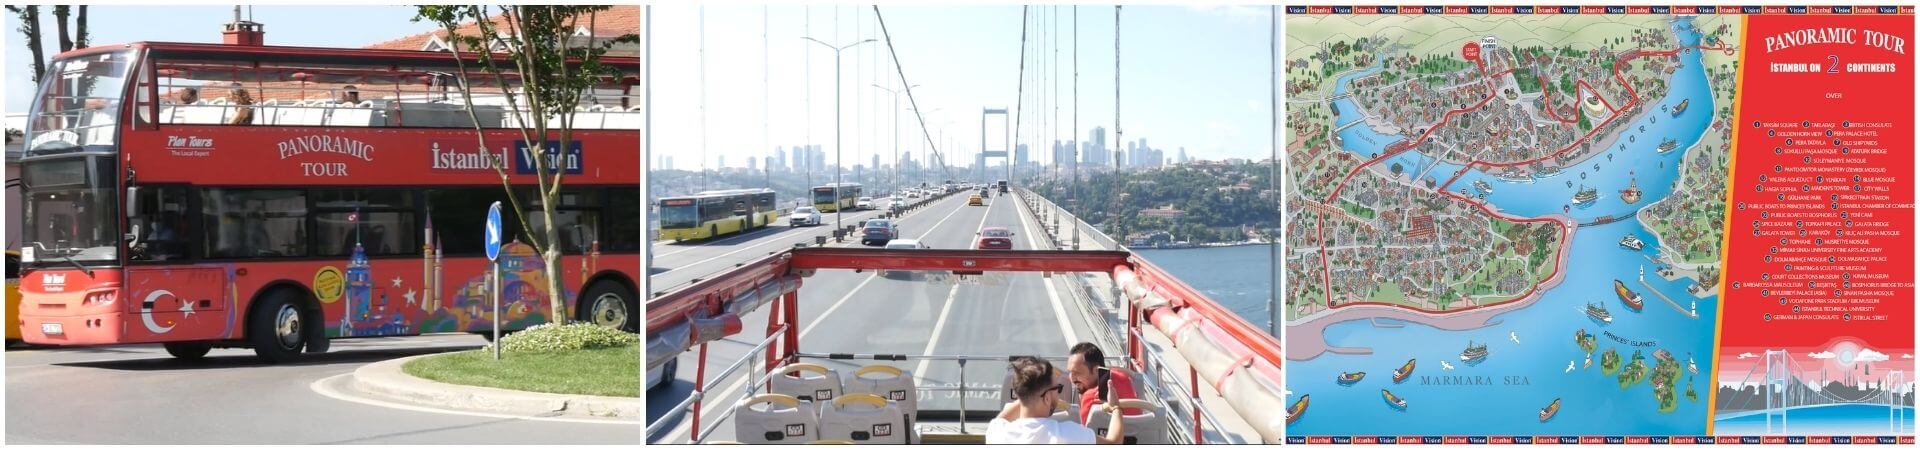 Panorama-Bustour durch Istanbul